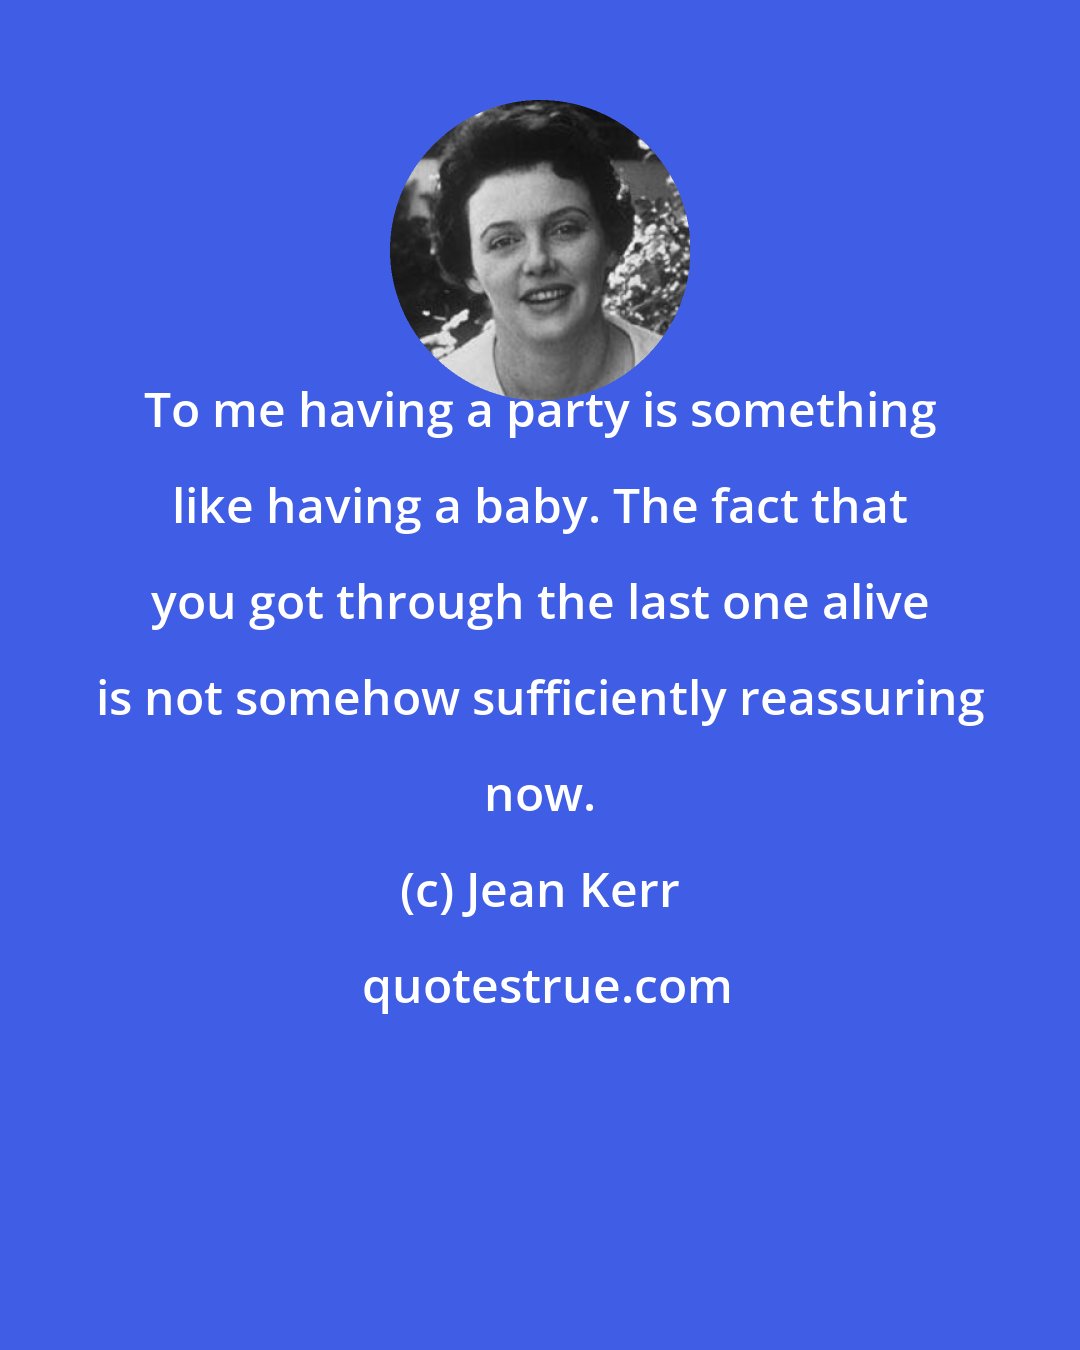 Jean Kerr: To me having a party is something like having a baby. The fact that you got through the last one alive is not somehow sufficiently reassuring now.